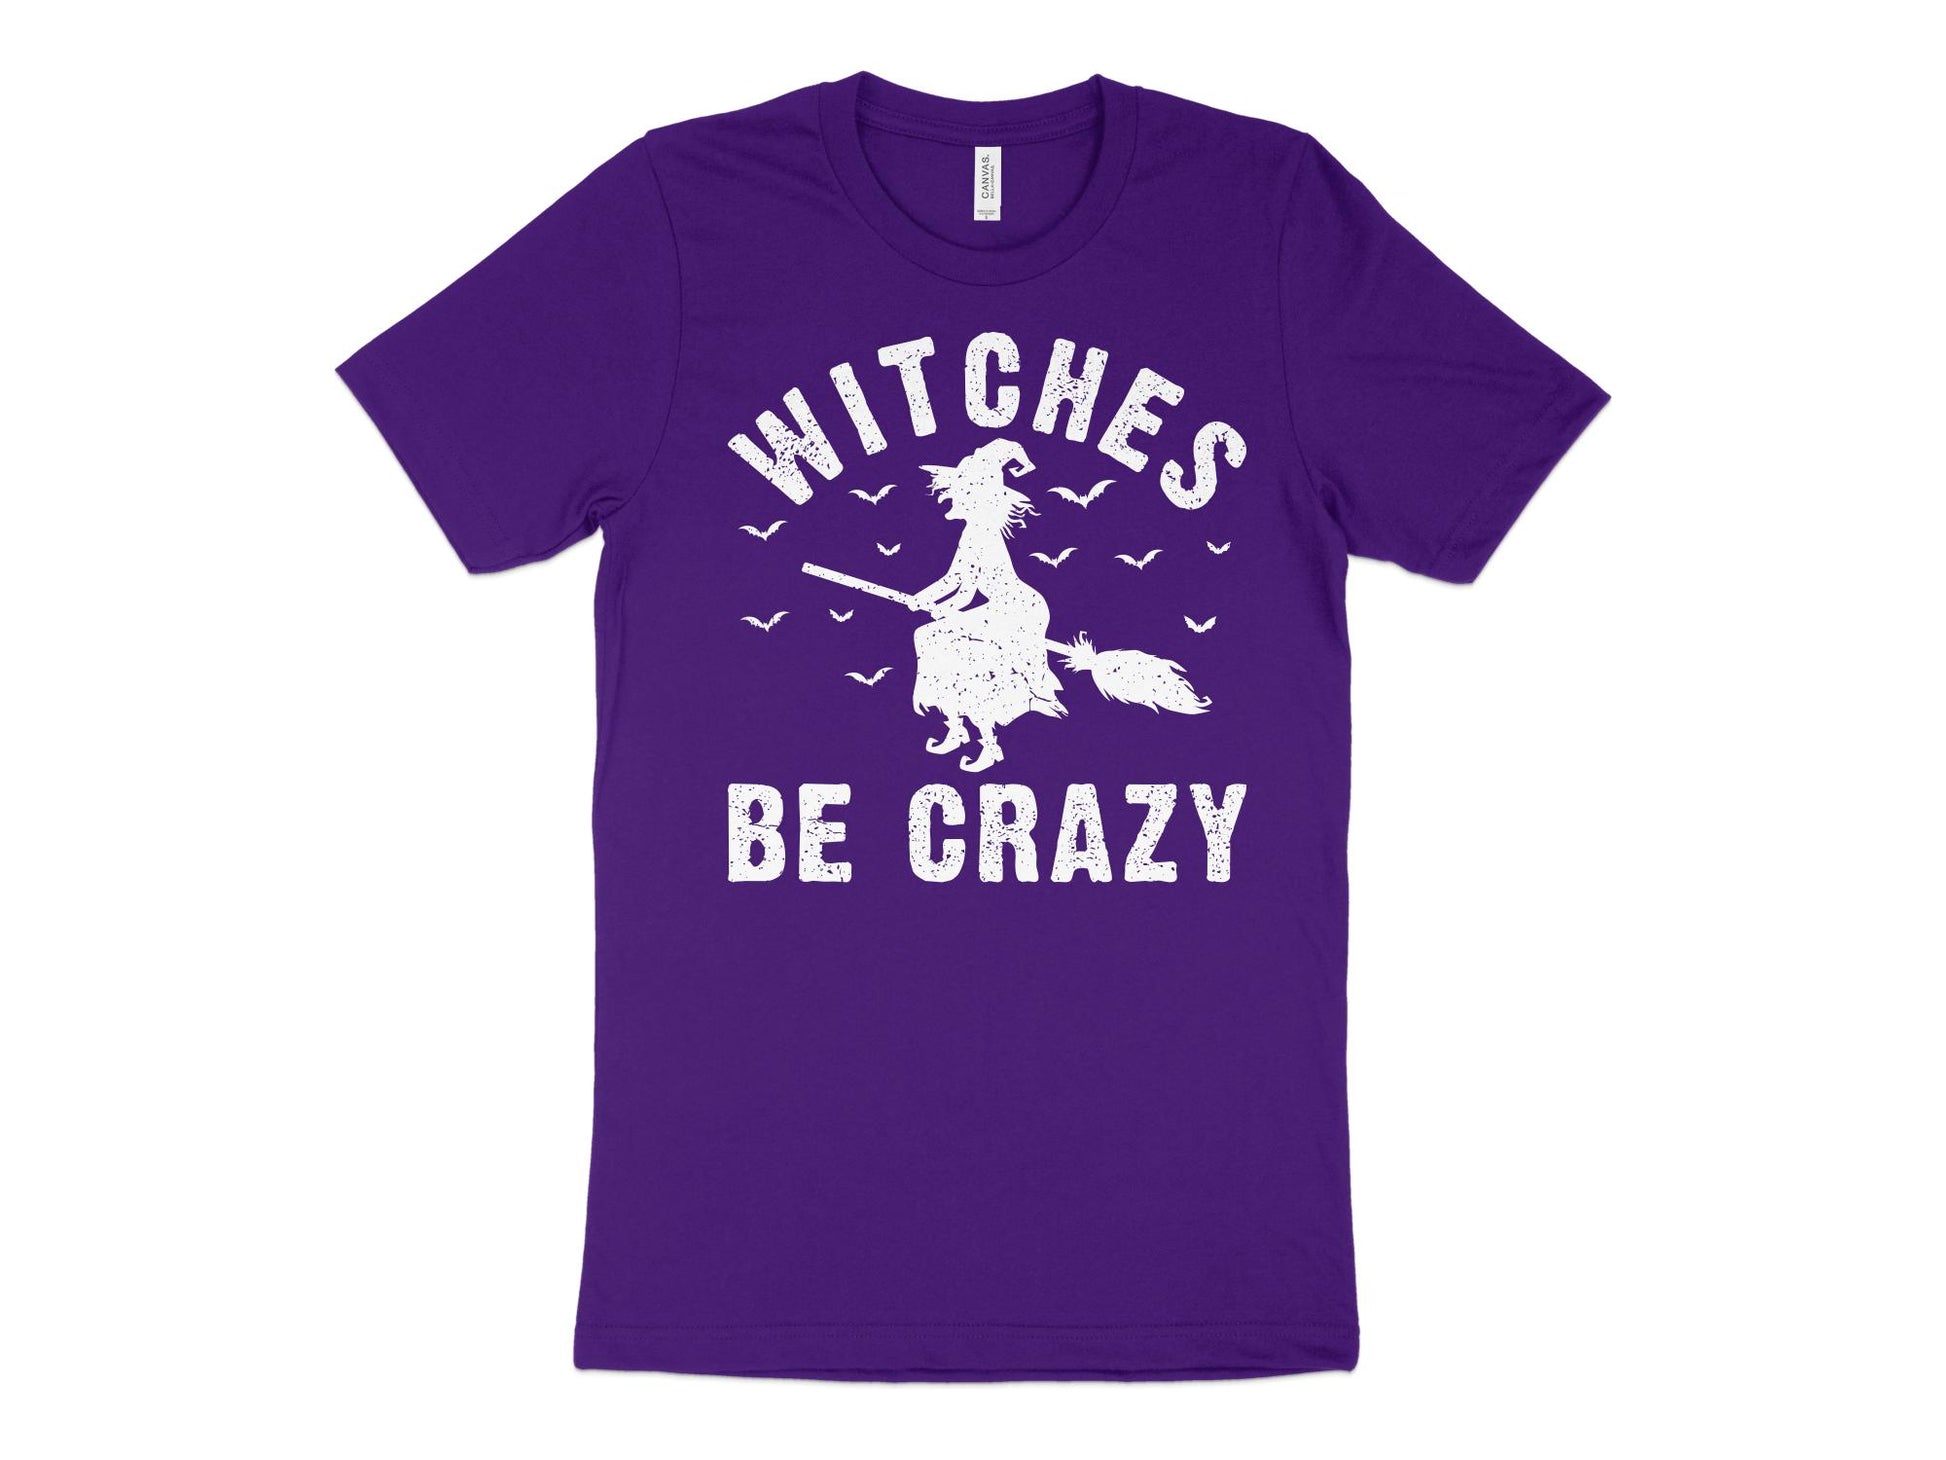 Witches Be Crazy Shirt, purple